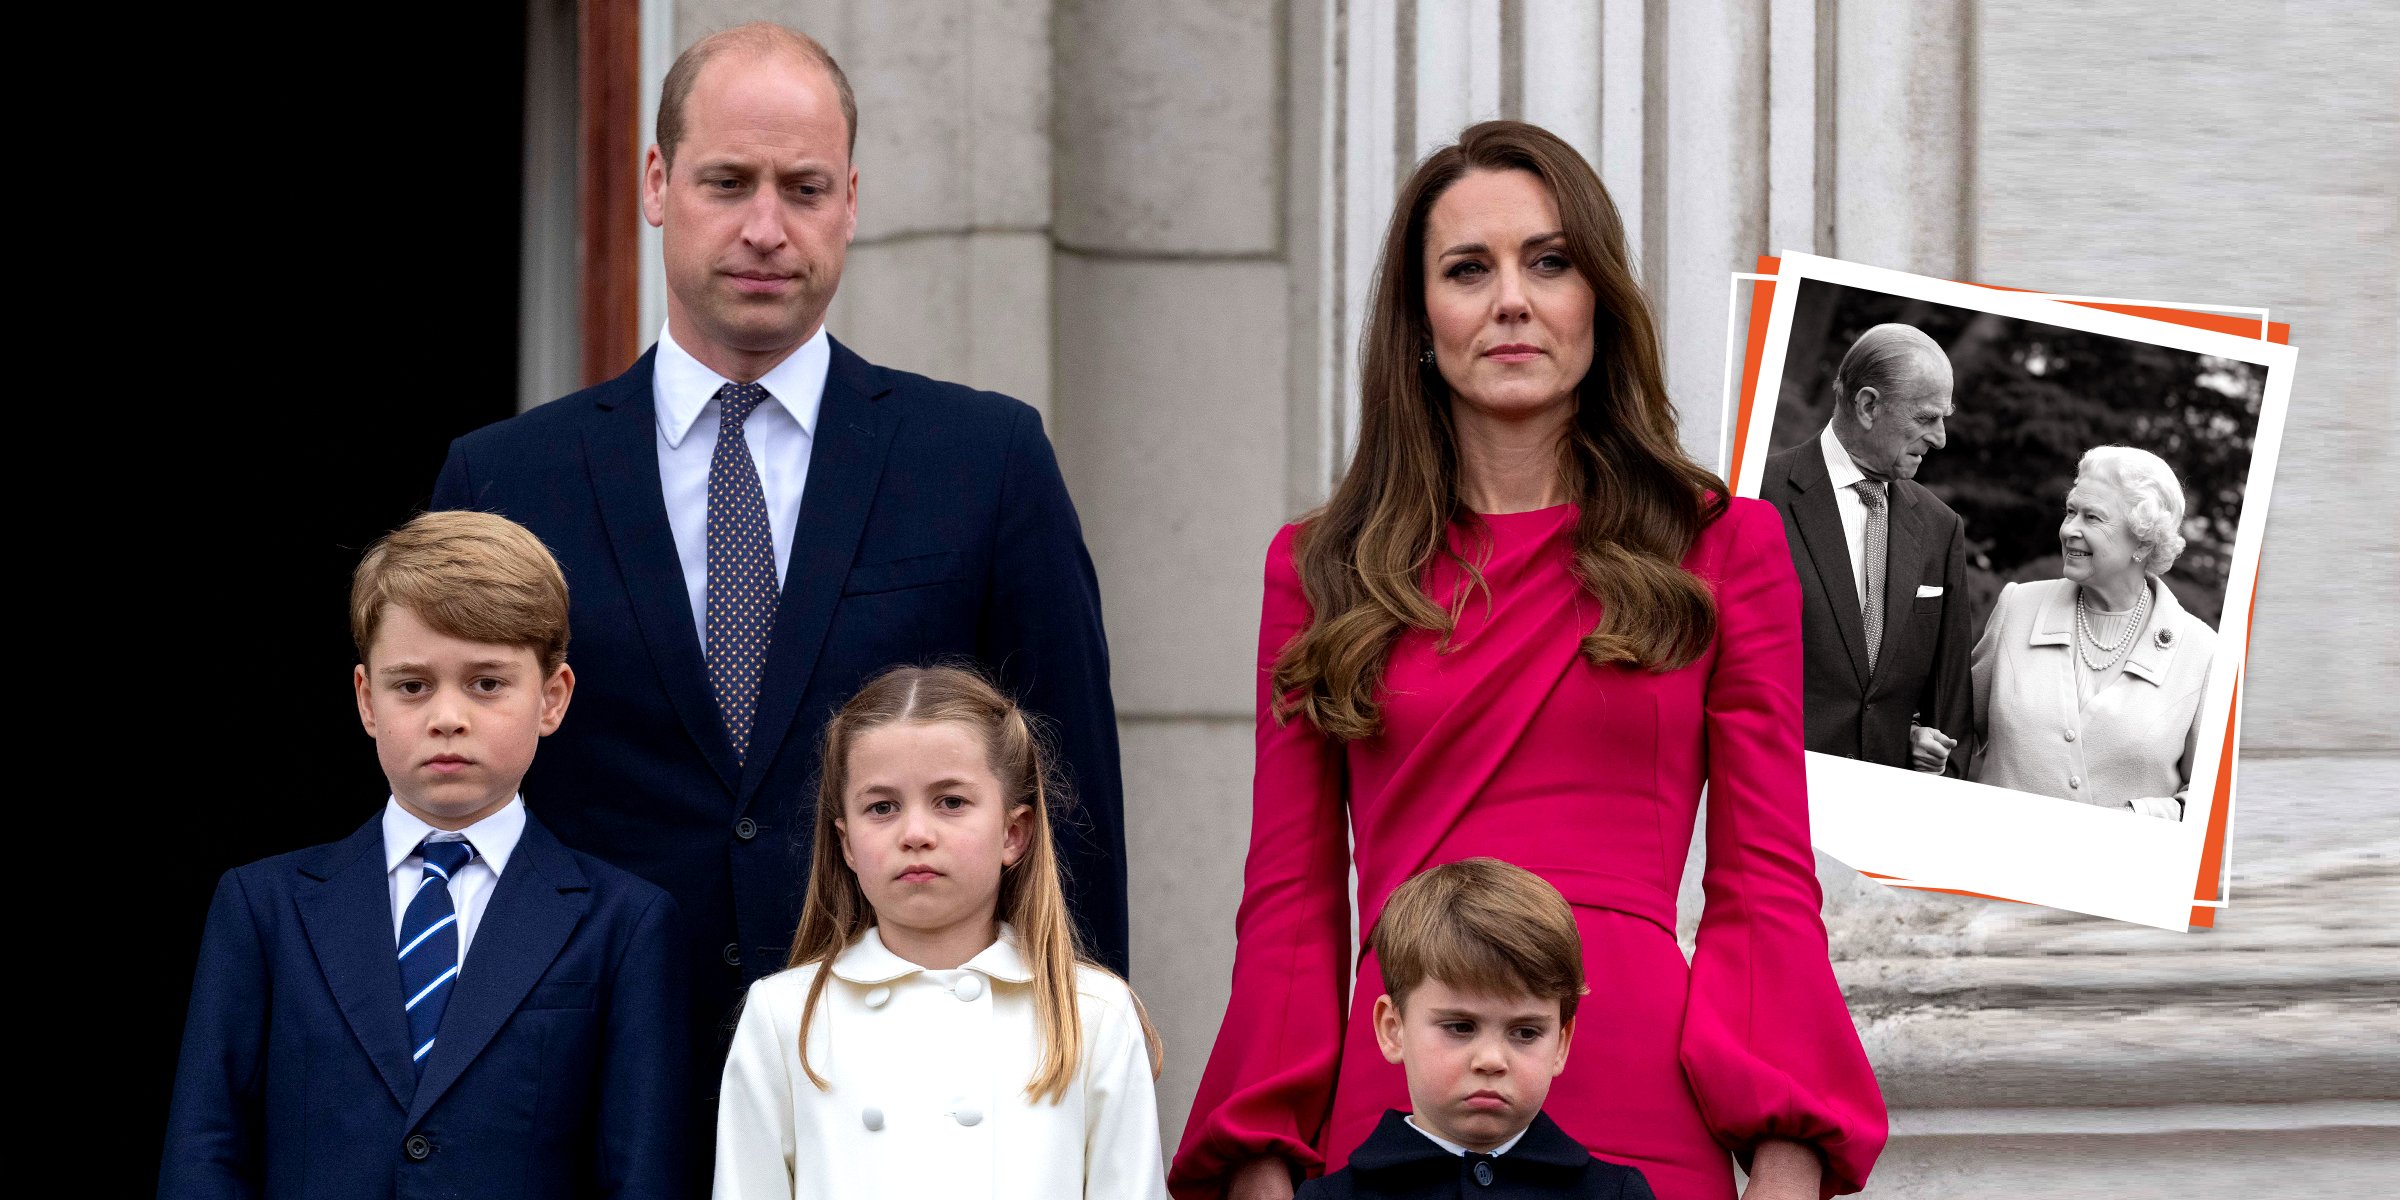 Prince William, Kate Middleton, Prince George, Princess Charlotte and Prince Louis | Prince Philip and Queen Elizabeth II | Source: Getty Images